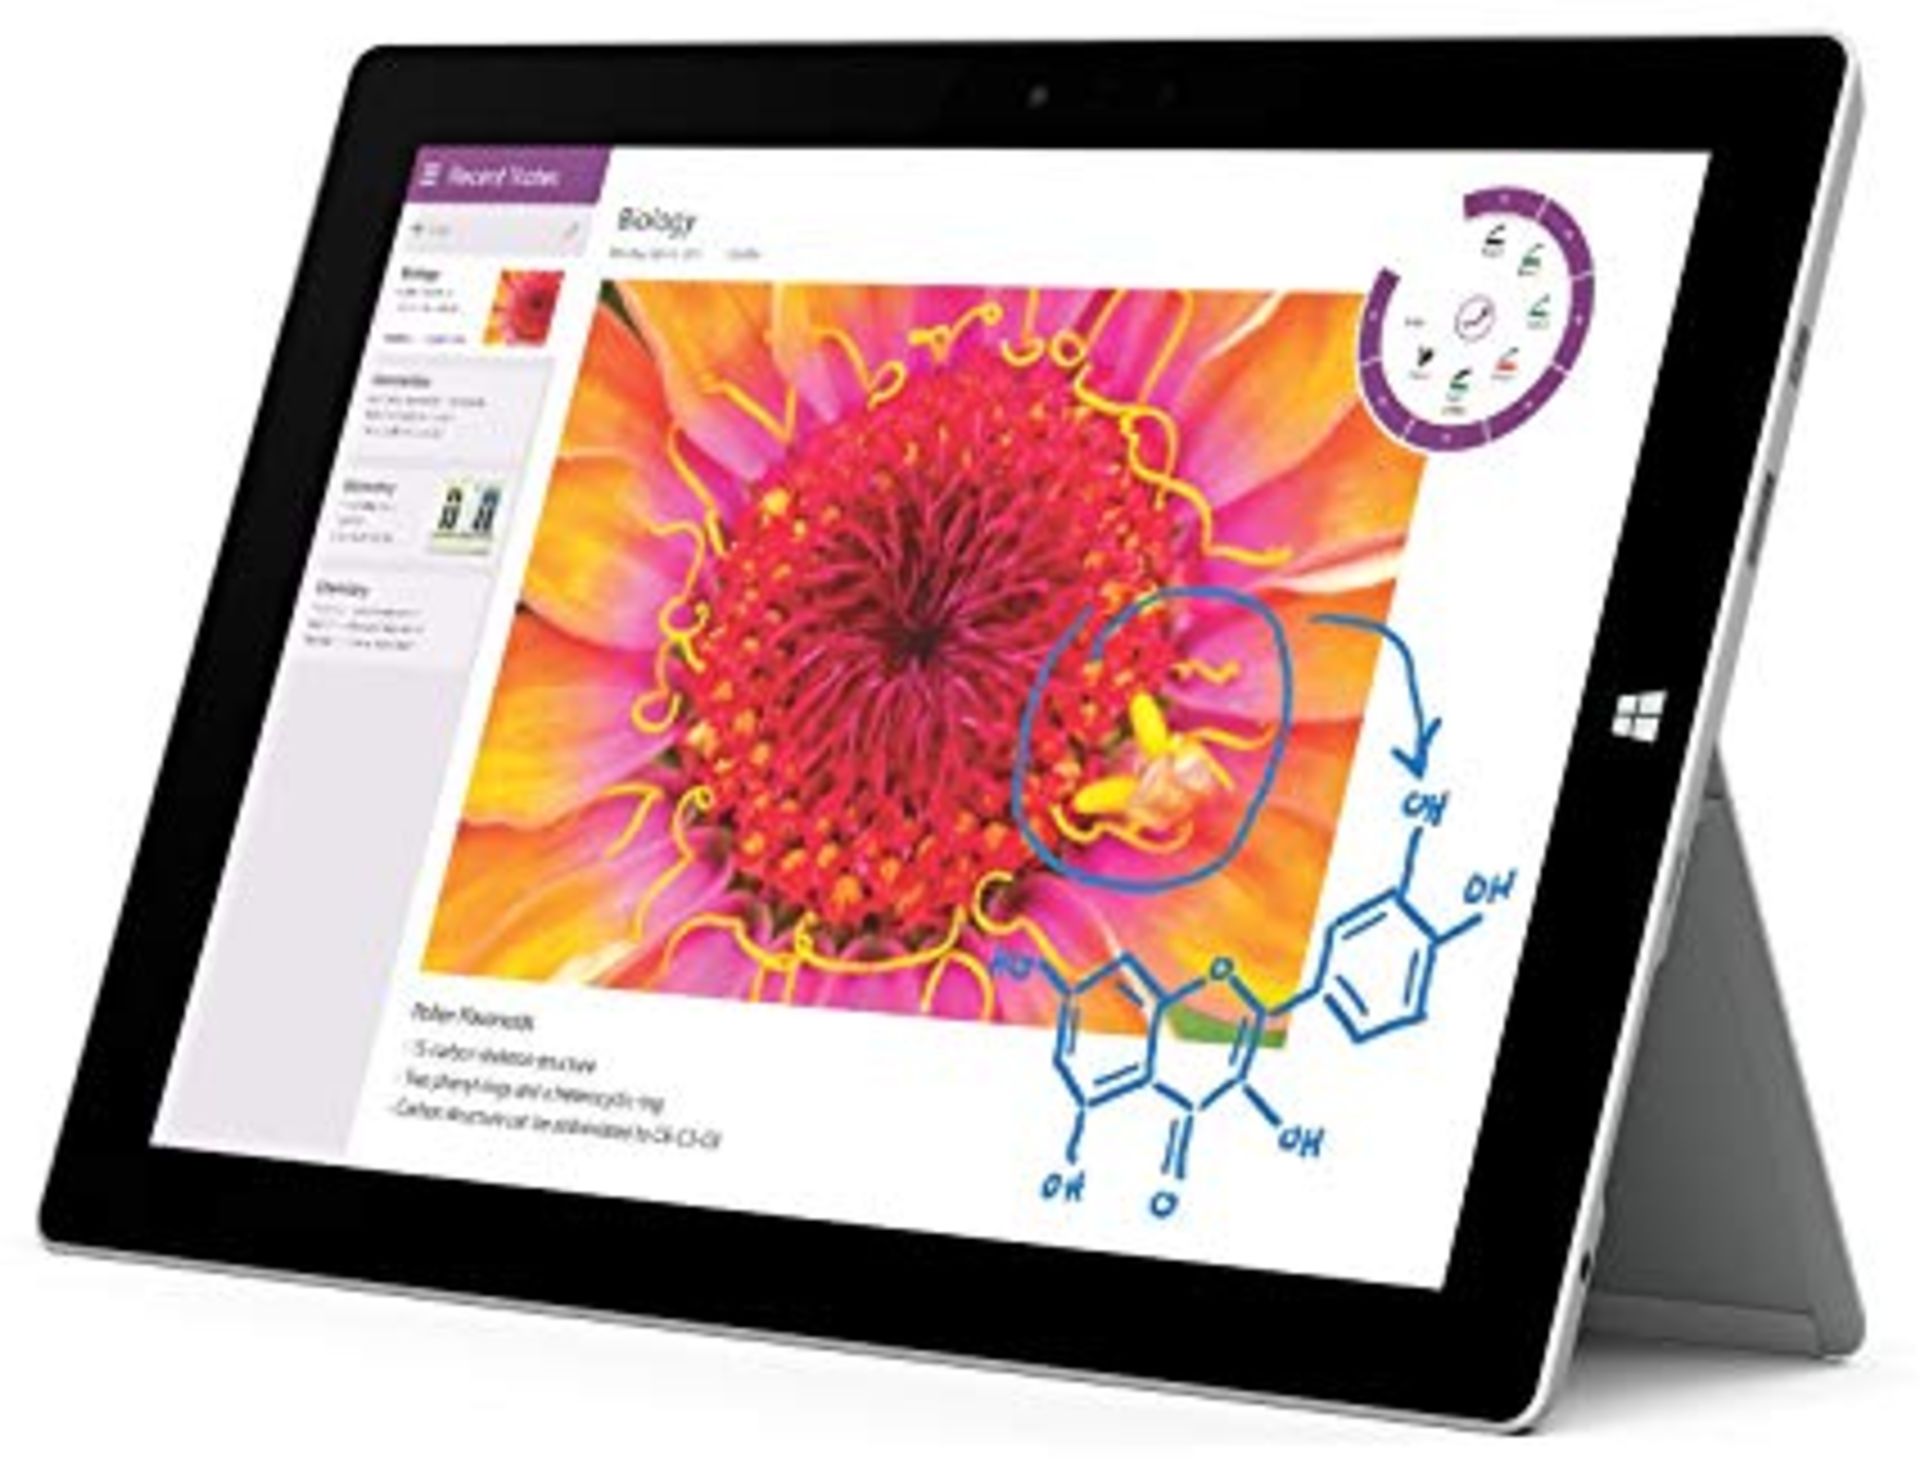 V Brand New Microsoft Surface 3 64GB WiFi 10.8" - New Condition But Open Box